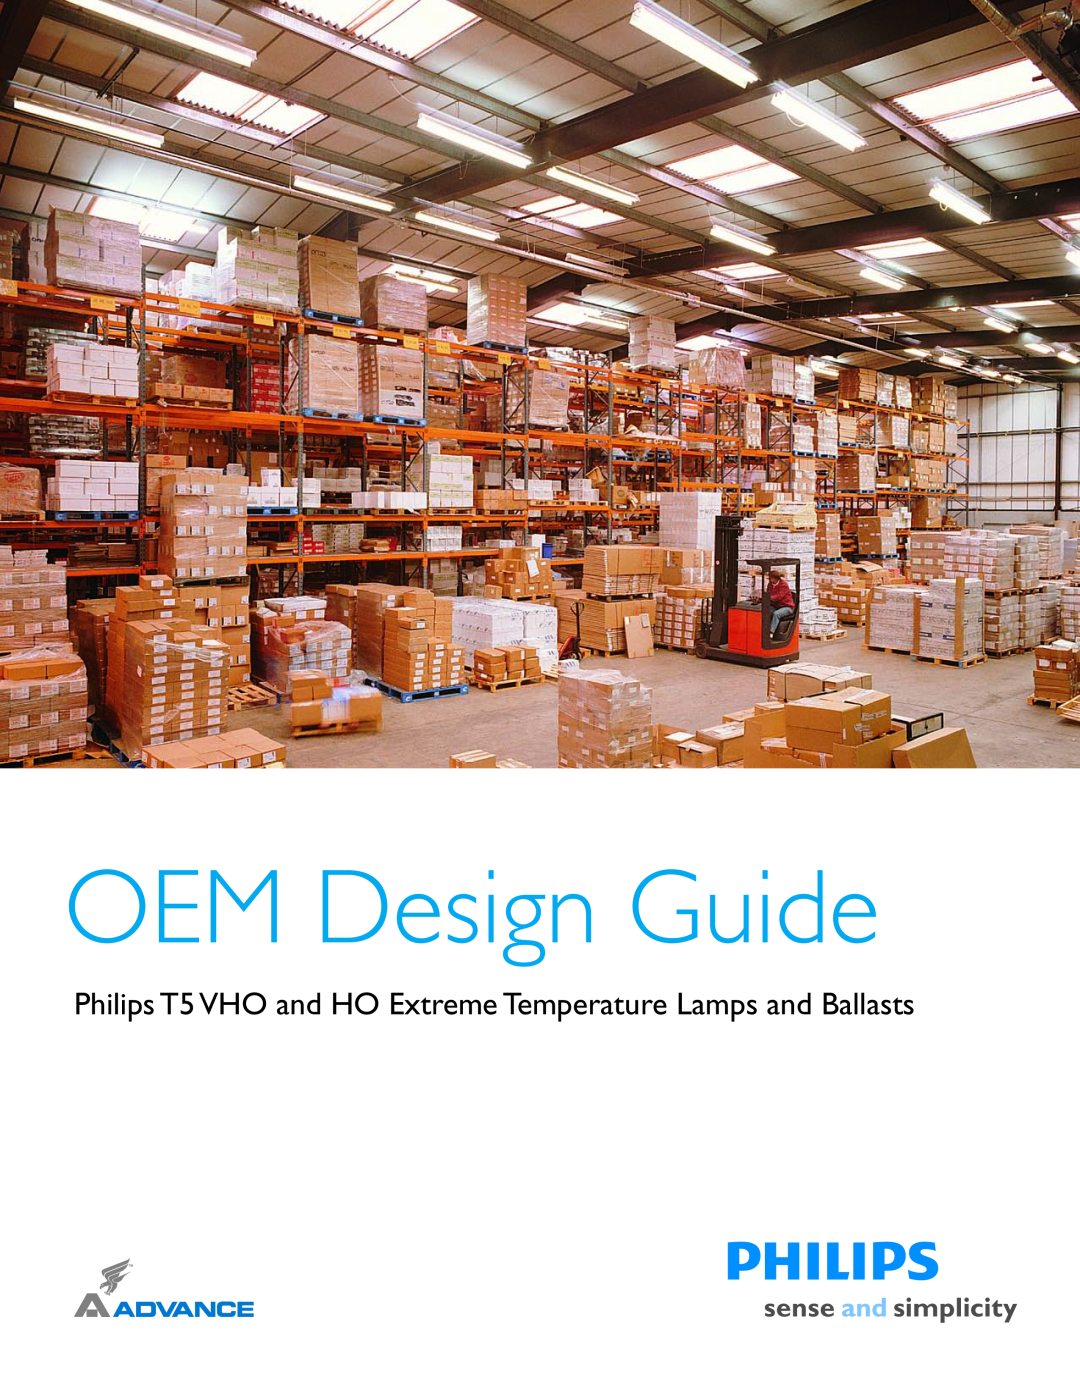 Philips T5VHO manual OEM Design Guide, Philips T5 VHO and HO Extreme Temperature Lamps and Ballasts 